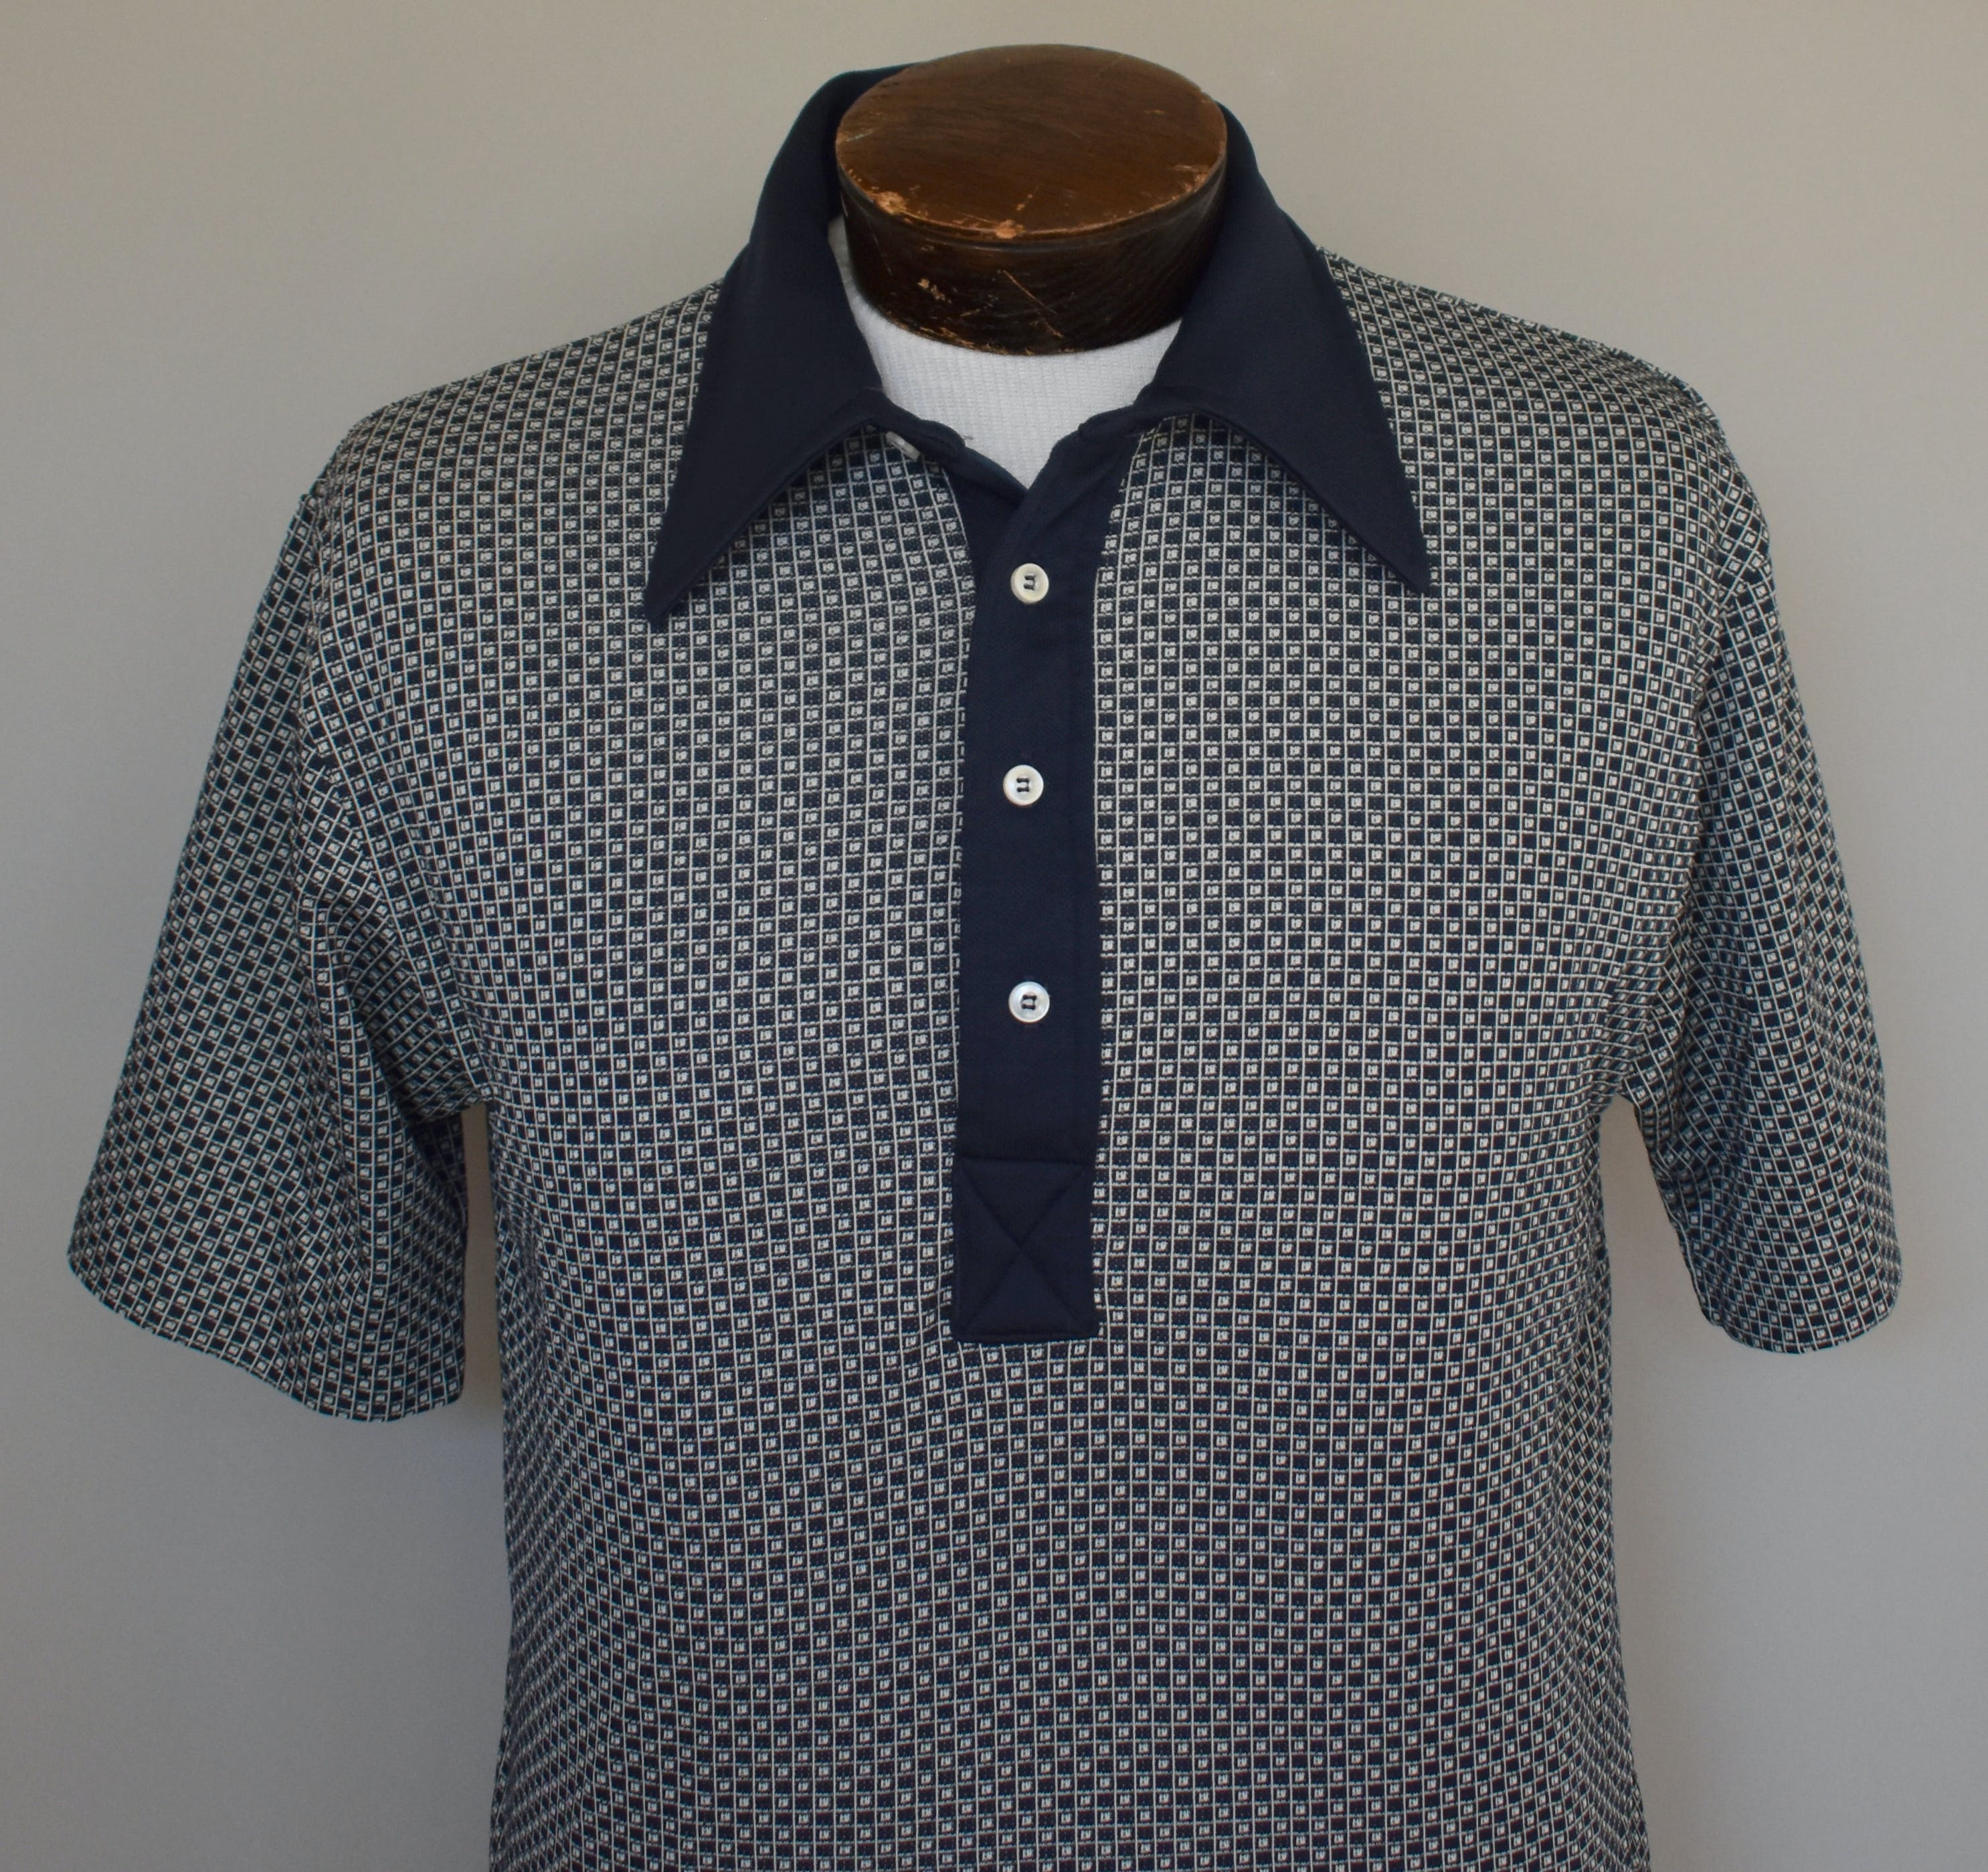 Vintage 60's Diamond Print Towncraft Polo Shirt by Jcpenney | Shop ...